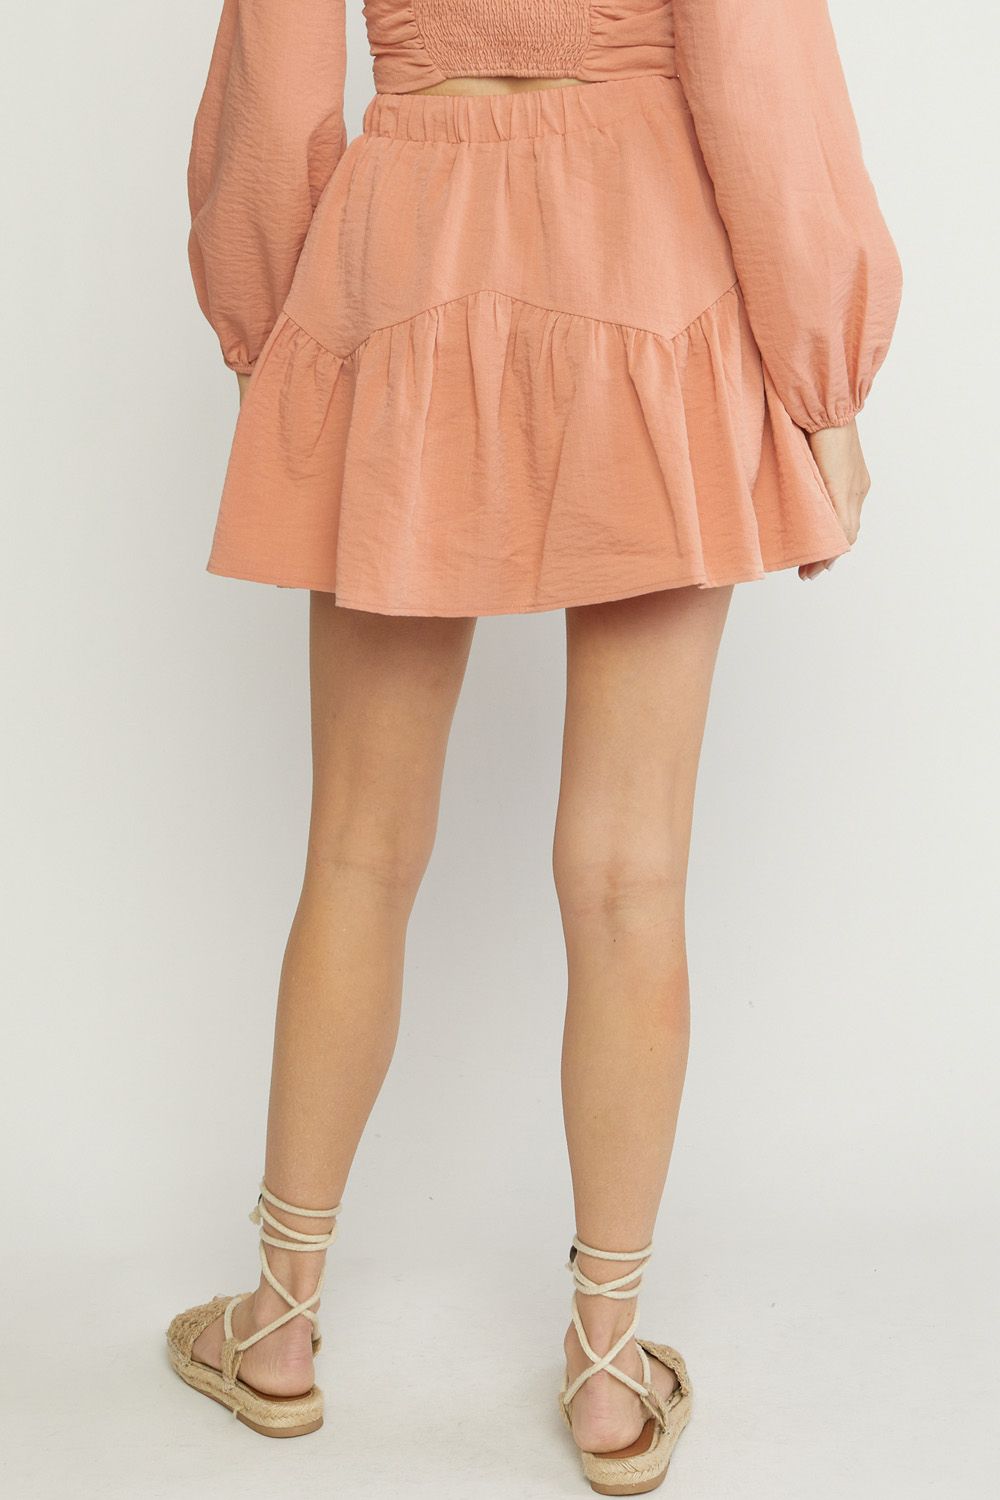 Entro® High-waisted Drawstring Skirt with Built in Shorts- Salmon